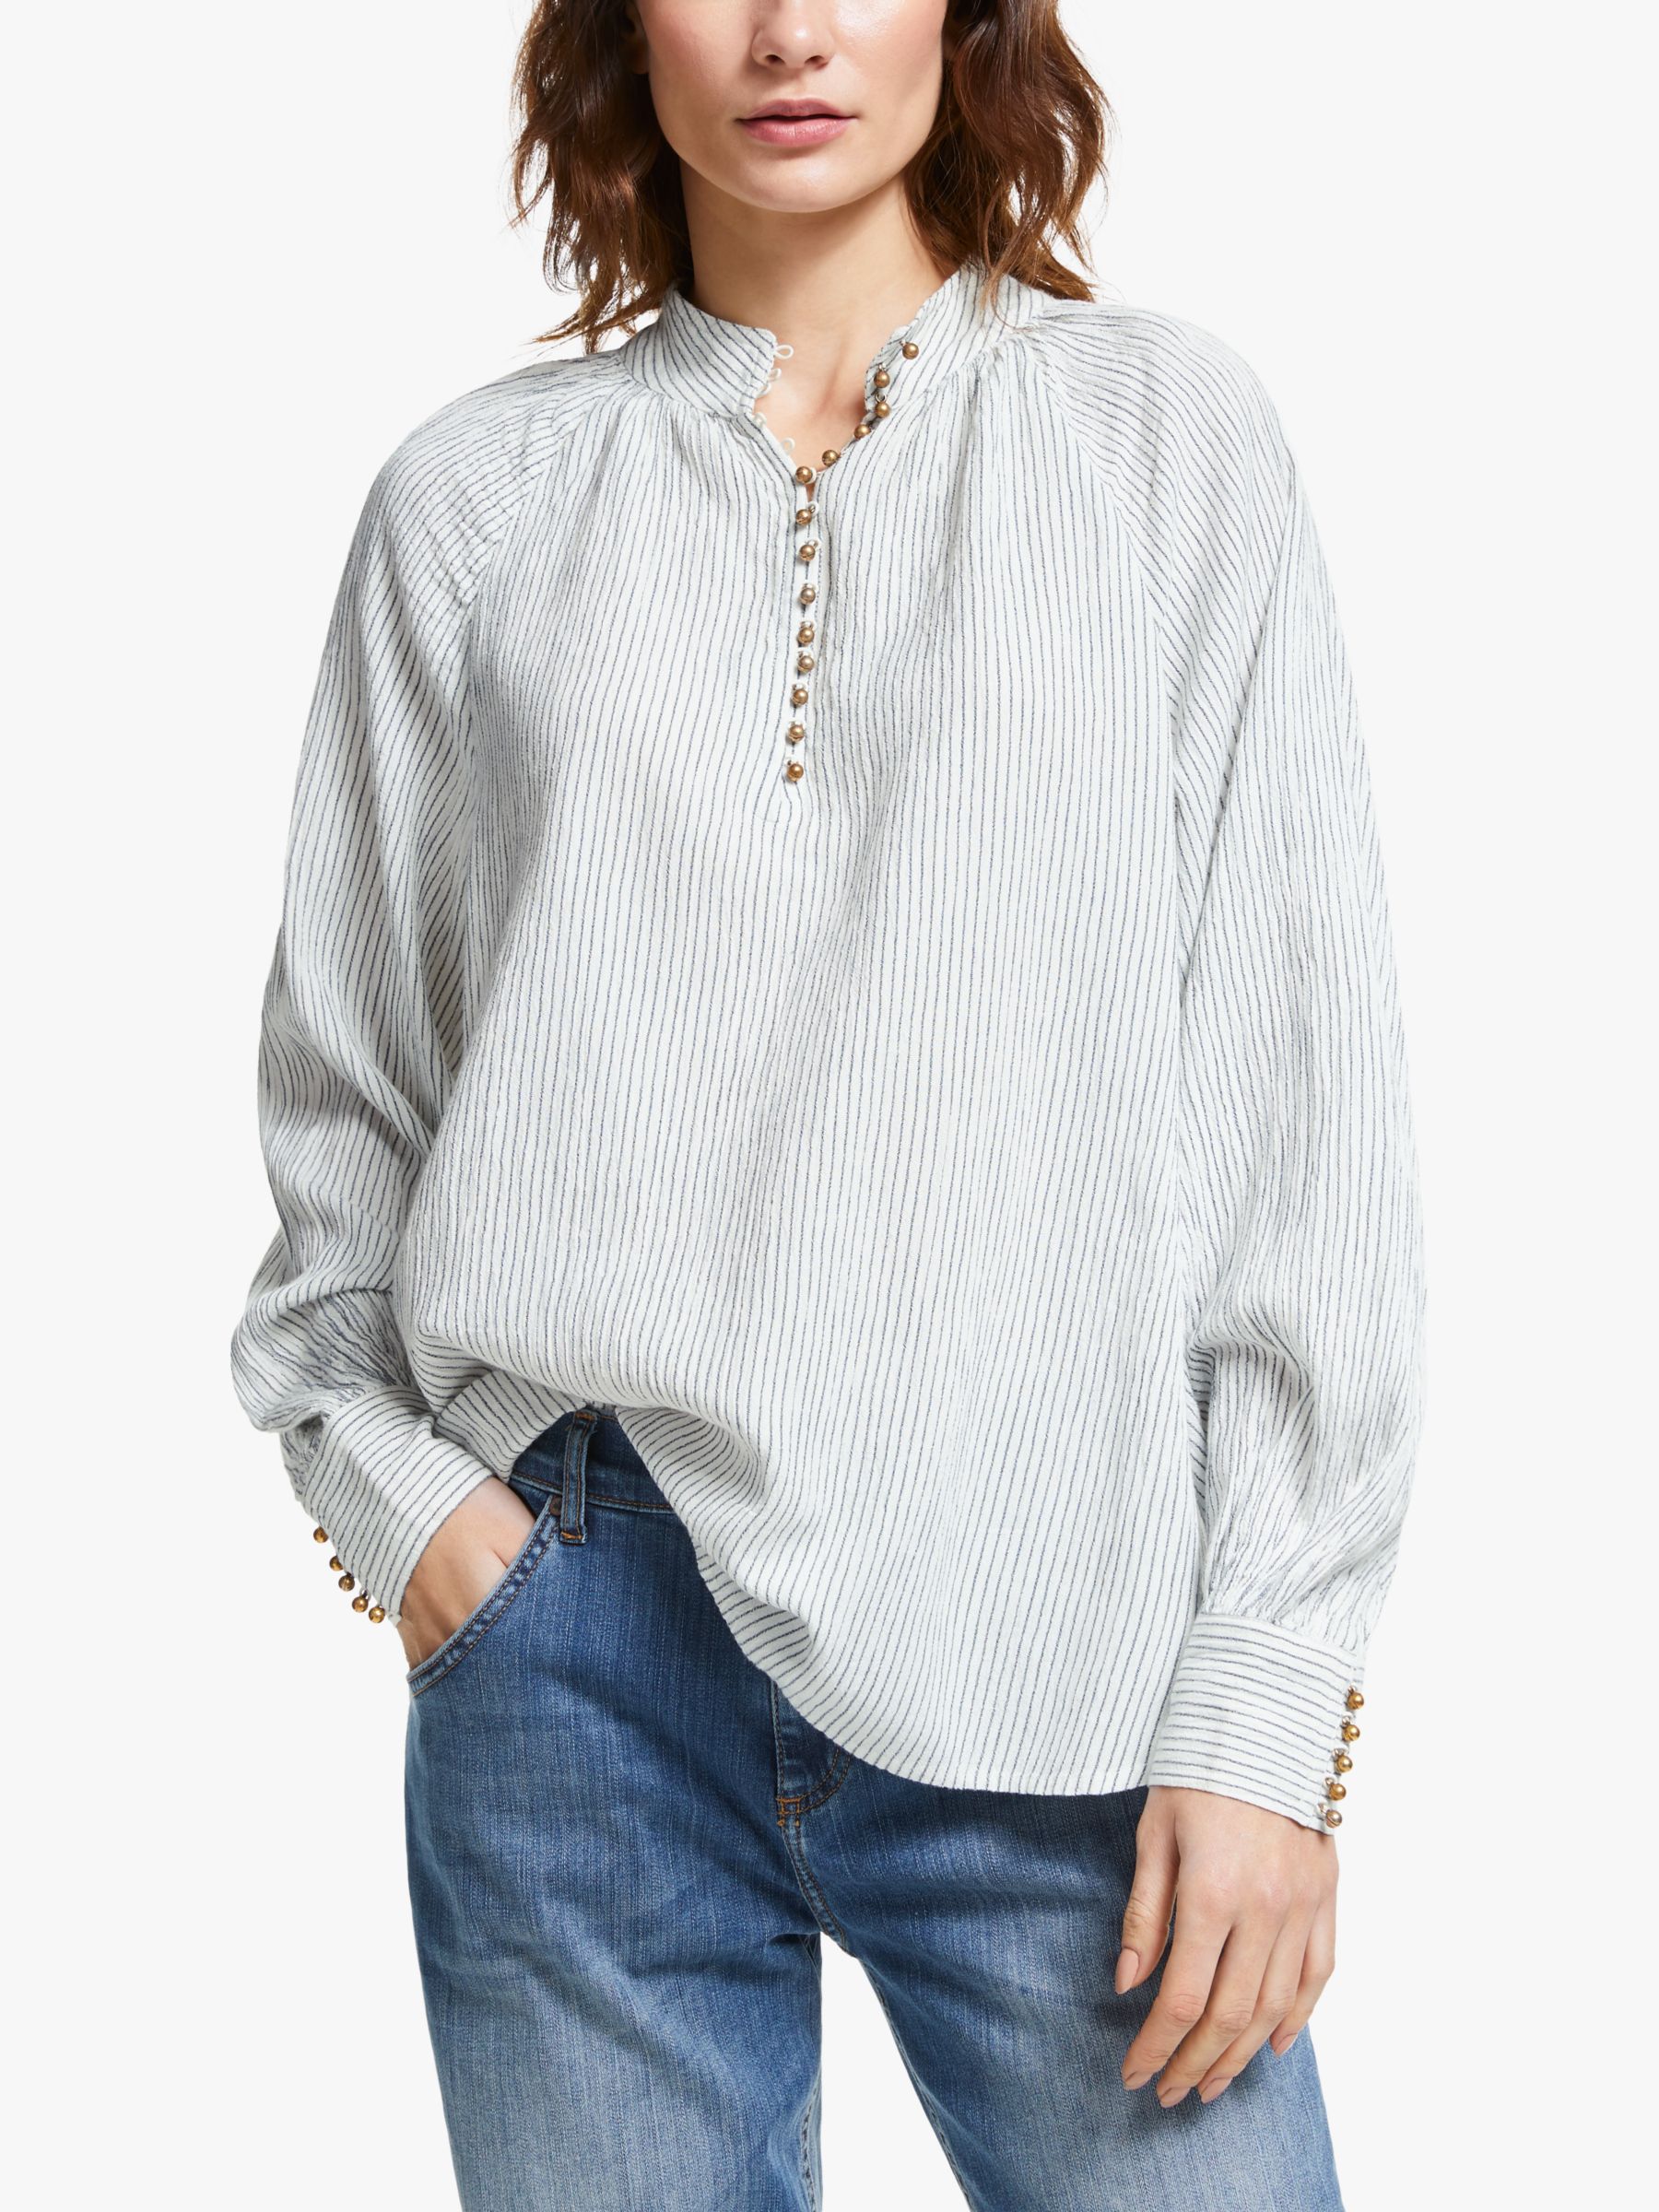 AND/OR Ivy Stripe Blouse, Ivory/Black